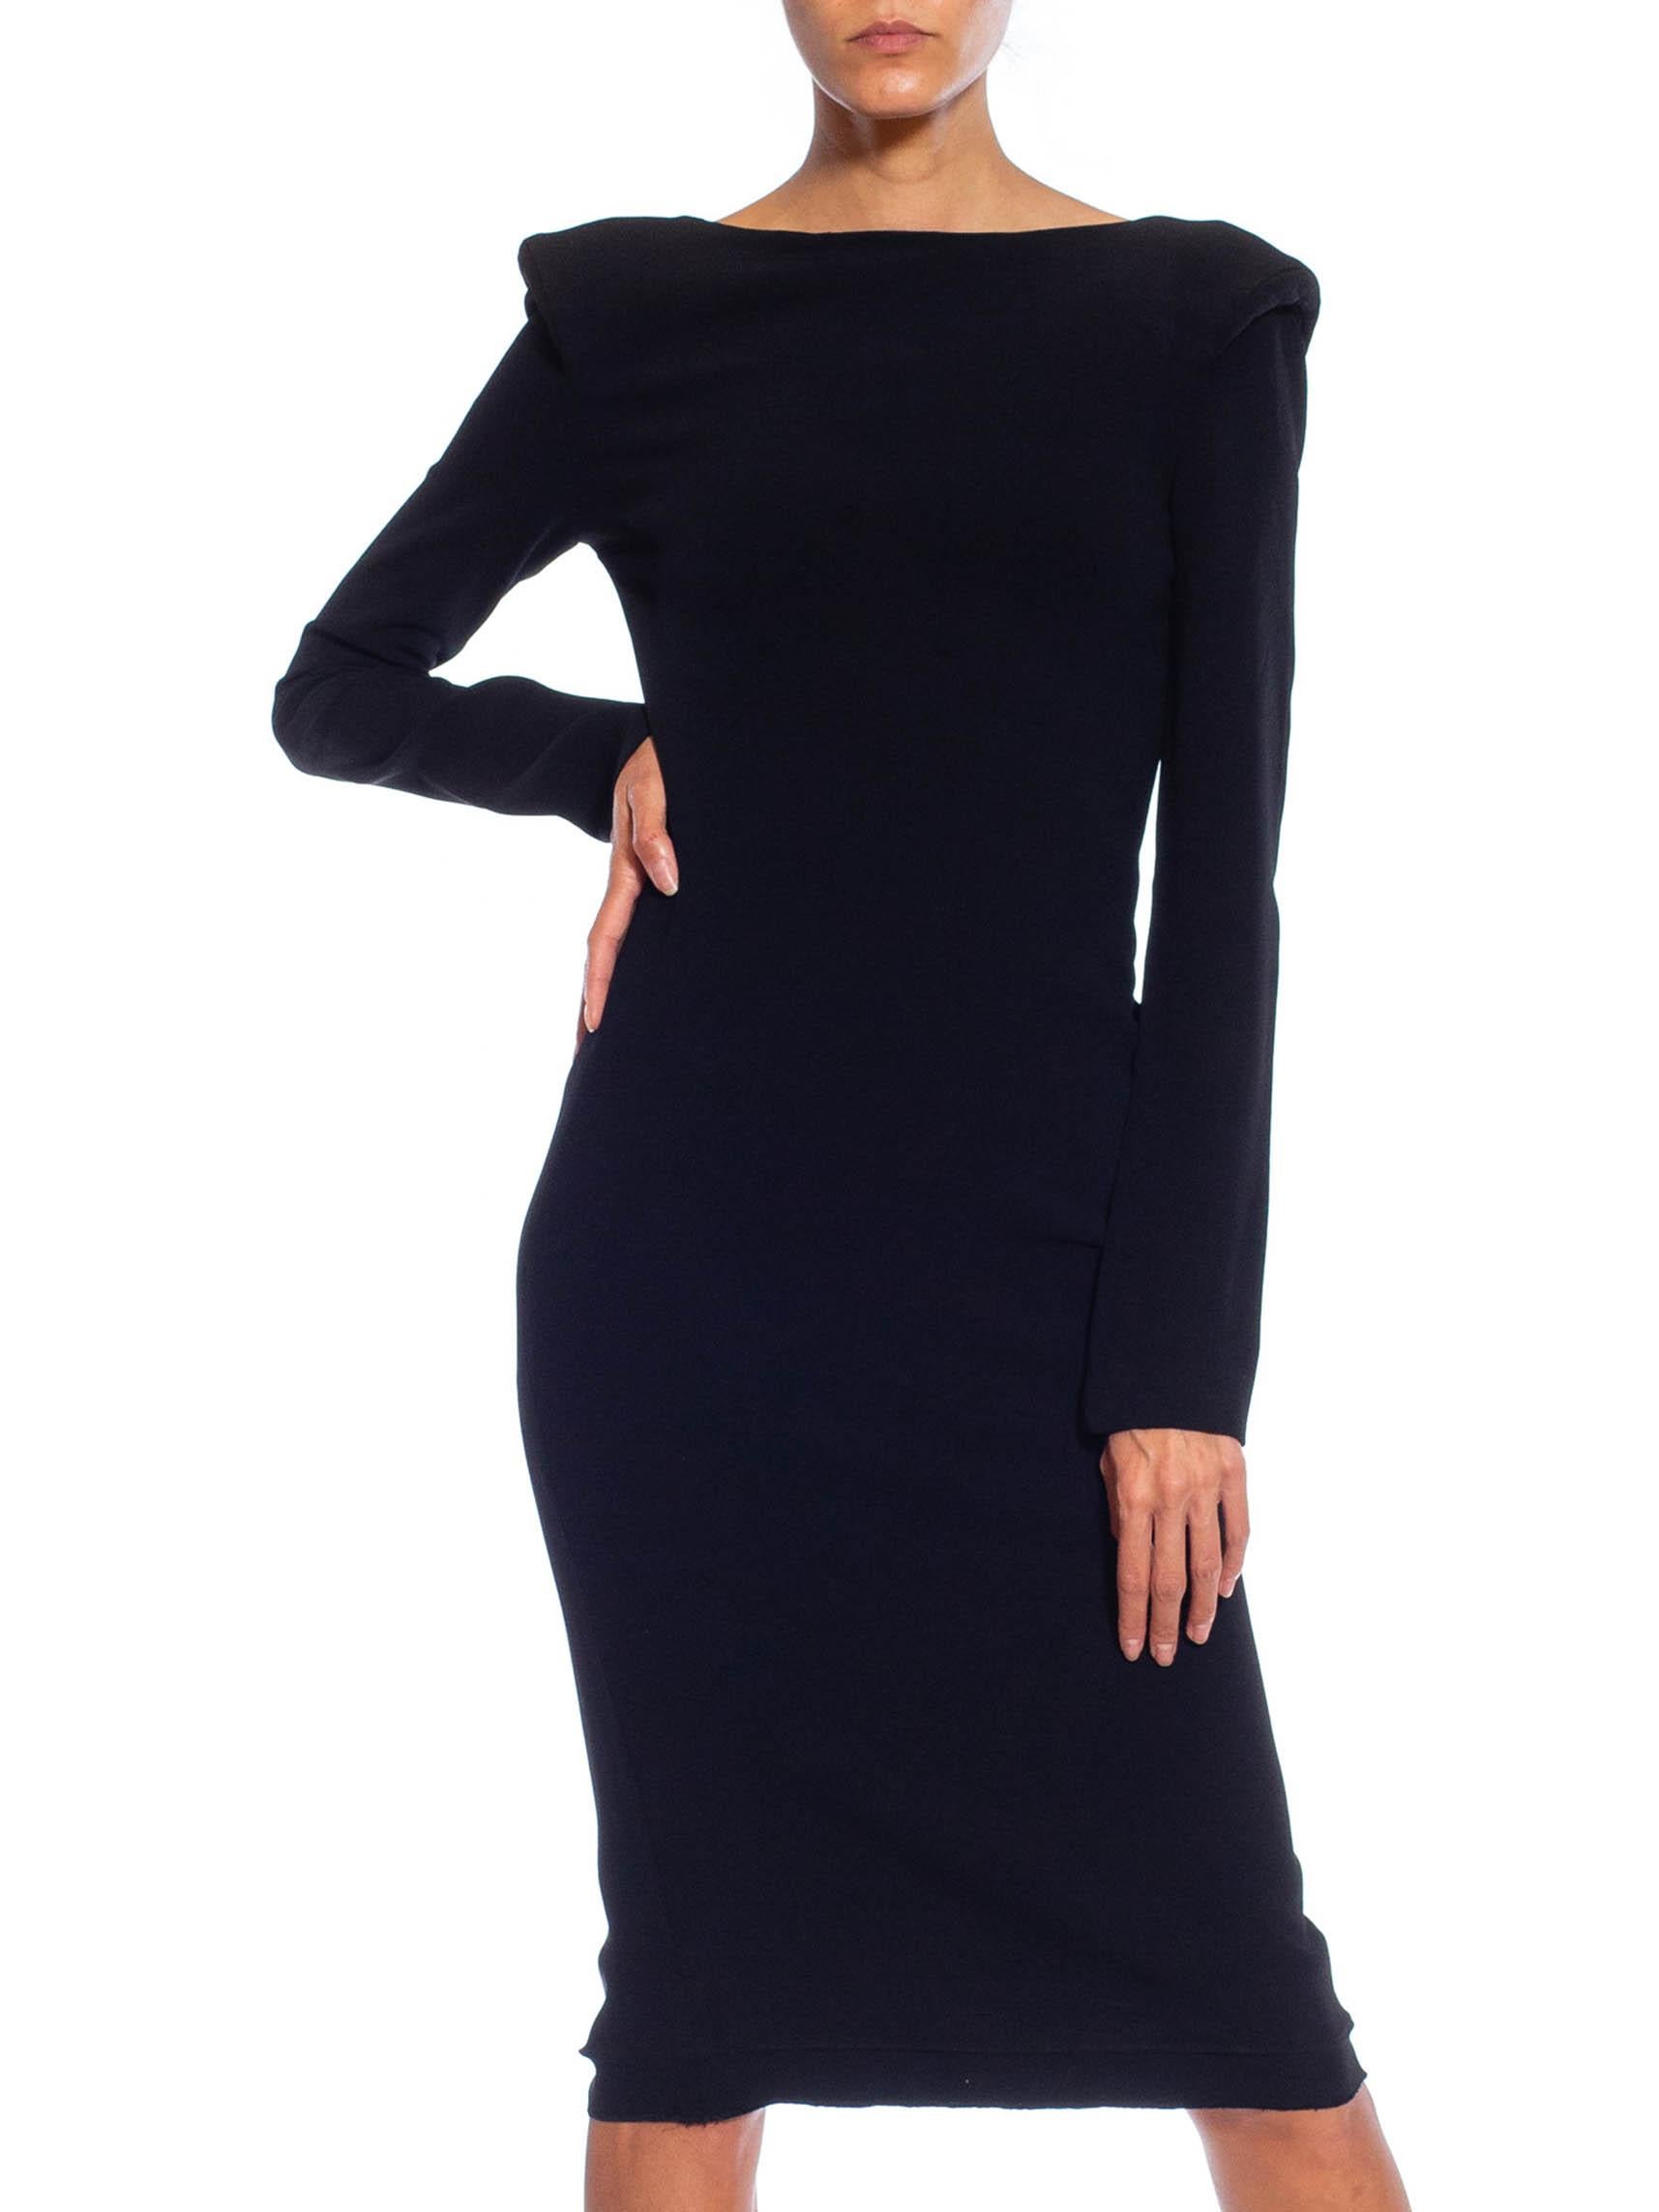 2000S TOM FORD Black Viscose Blend Long Sleeve Backless Dress With Padded Shoul For Sale 1